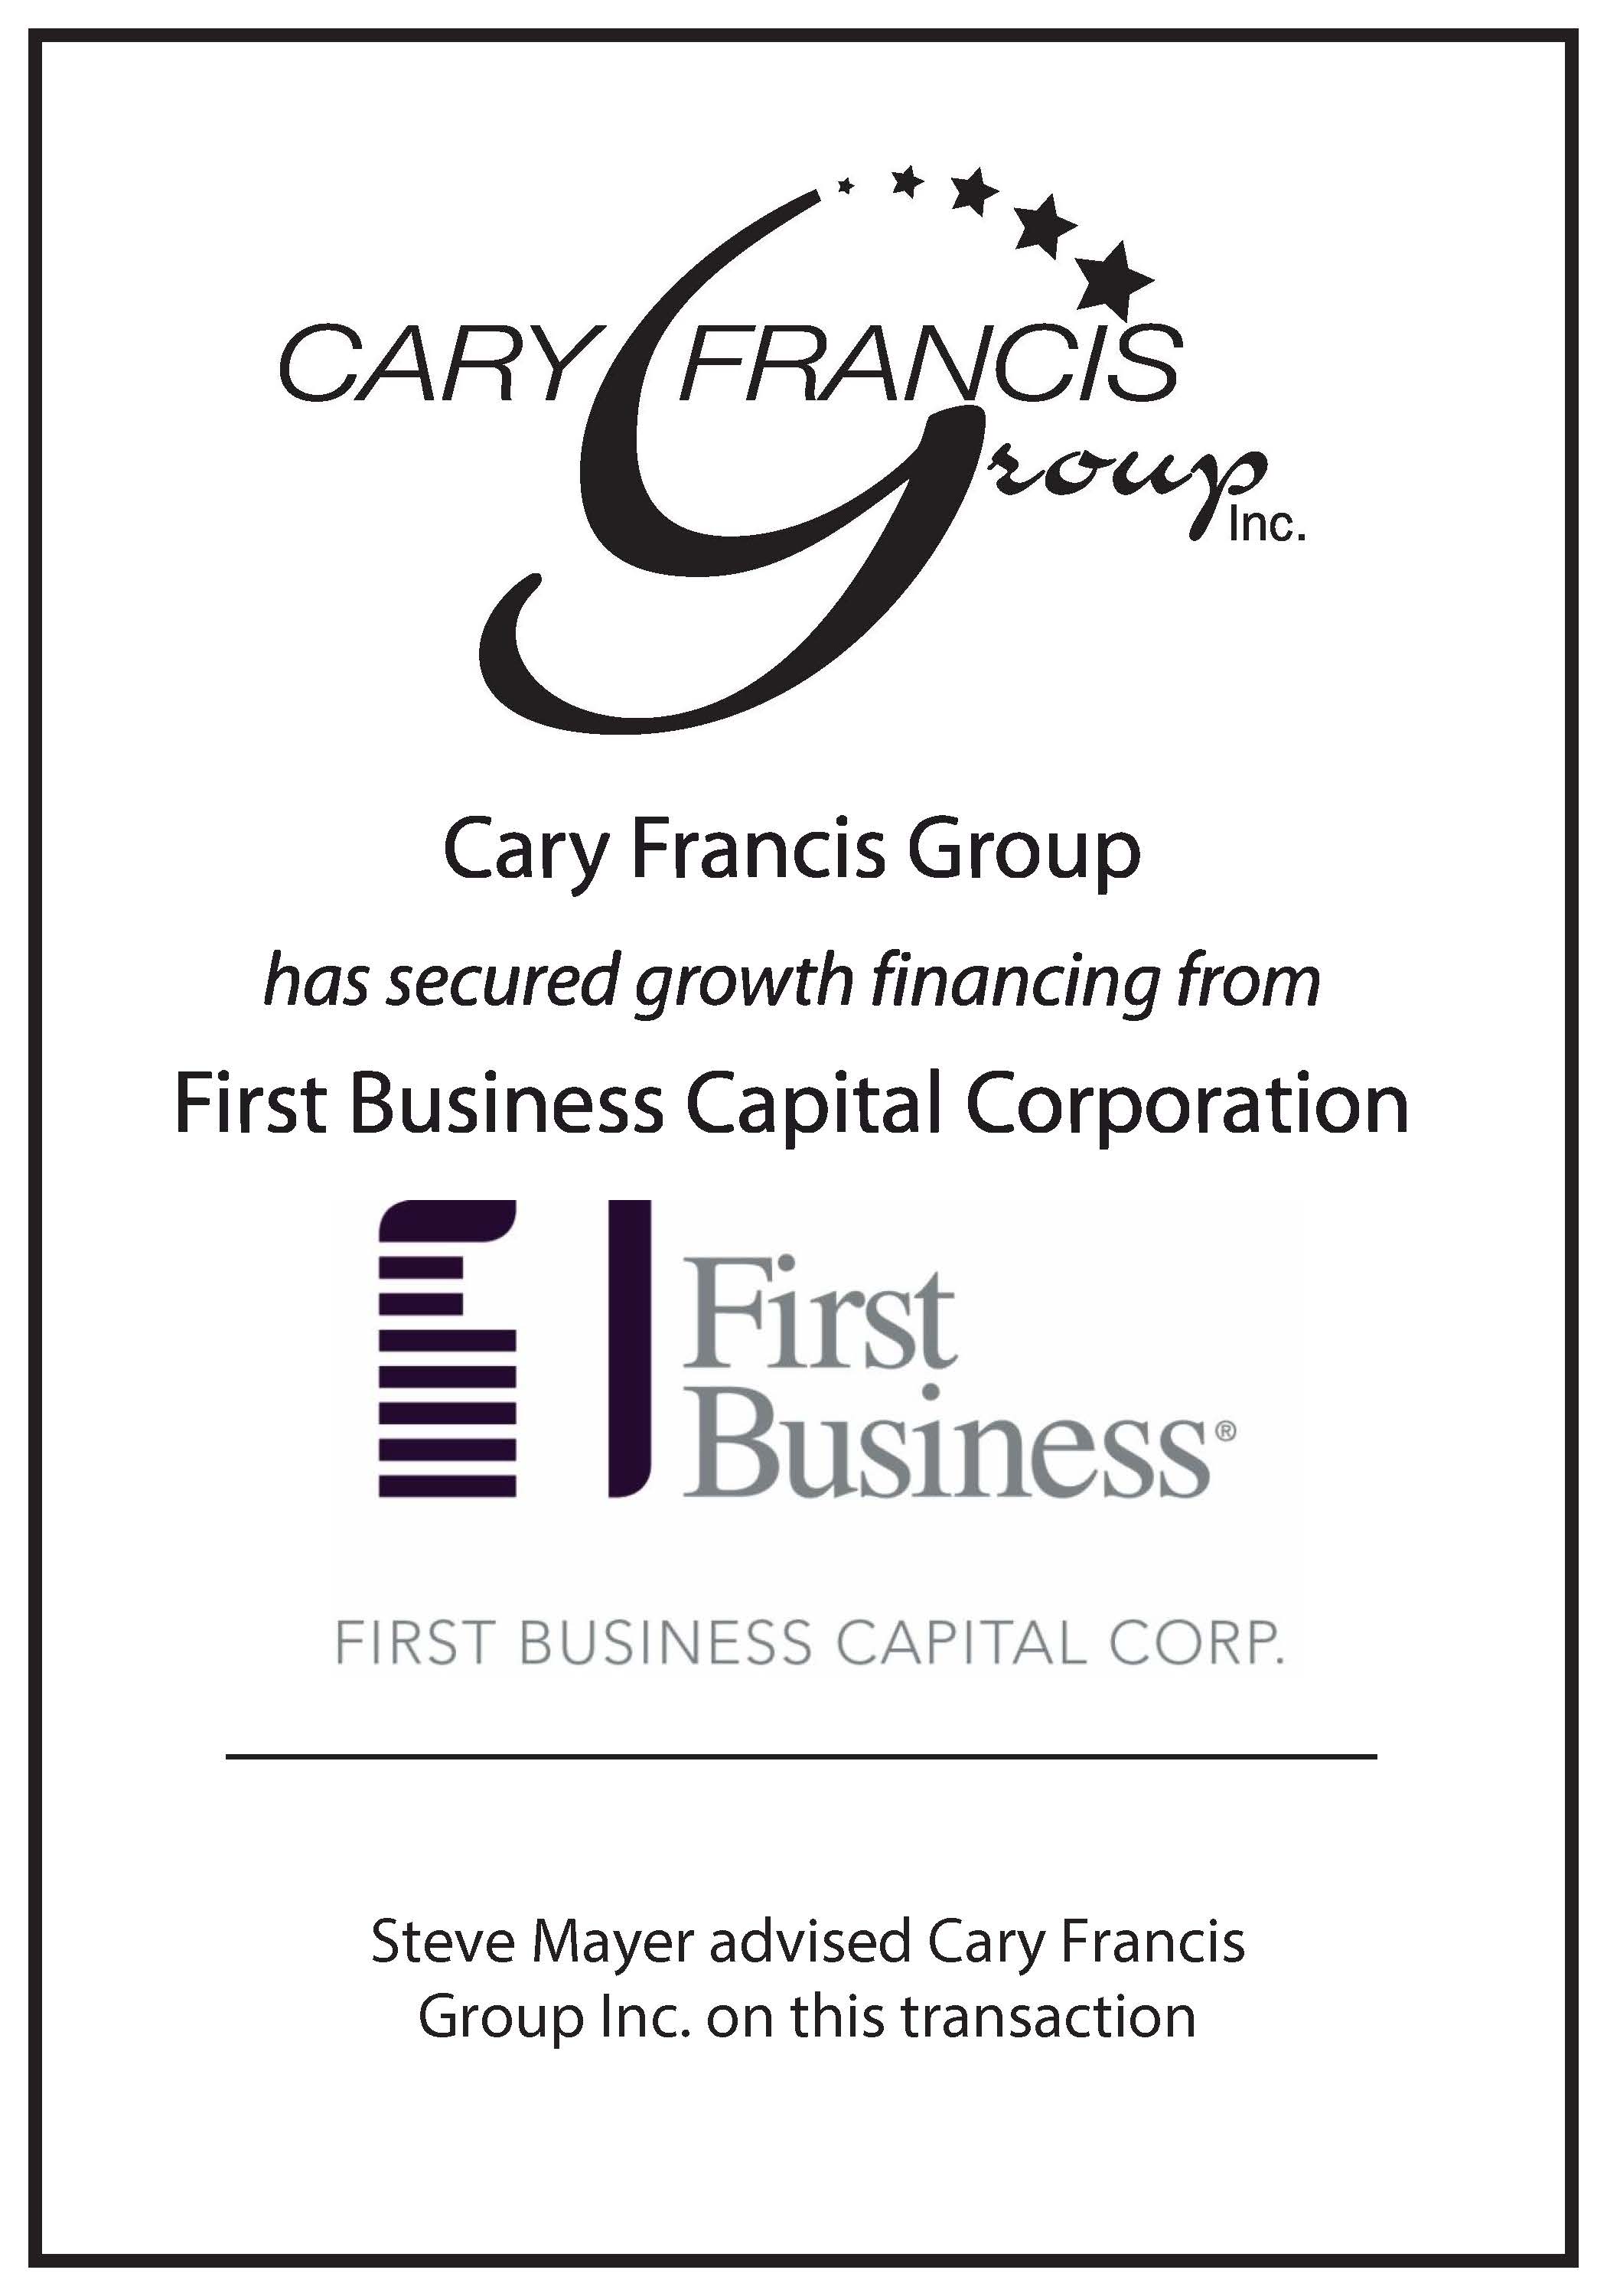 Cary Francis Group